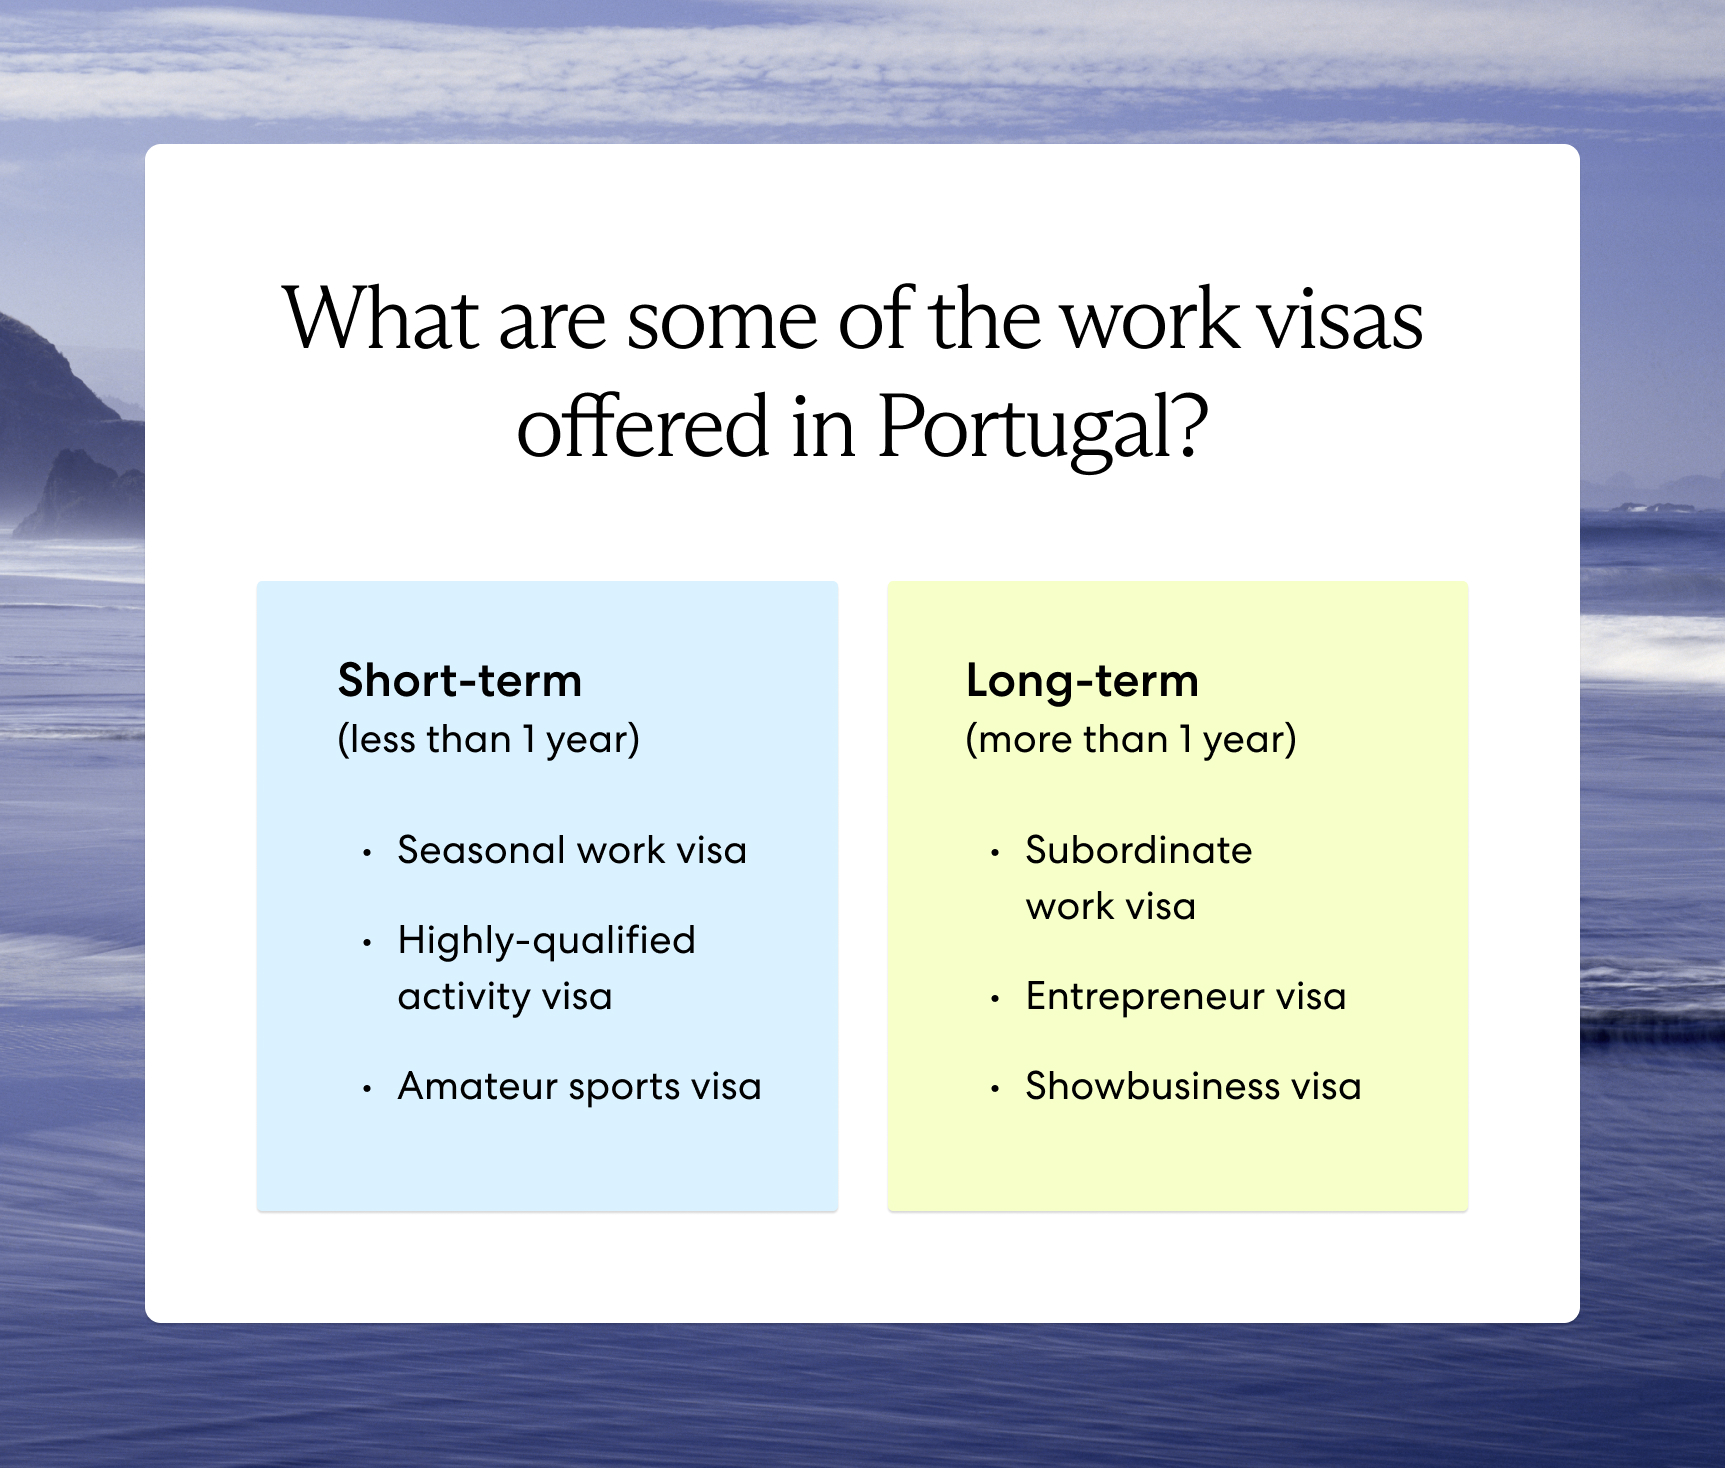 Image shows different work visas offered in Portugal